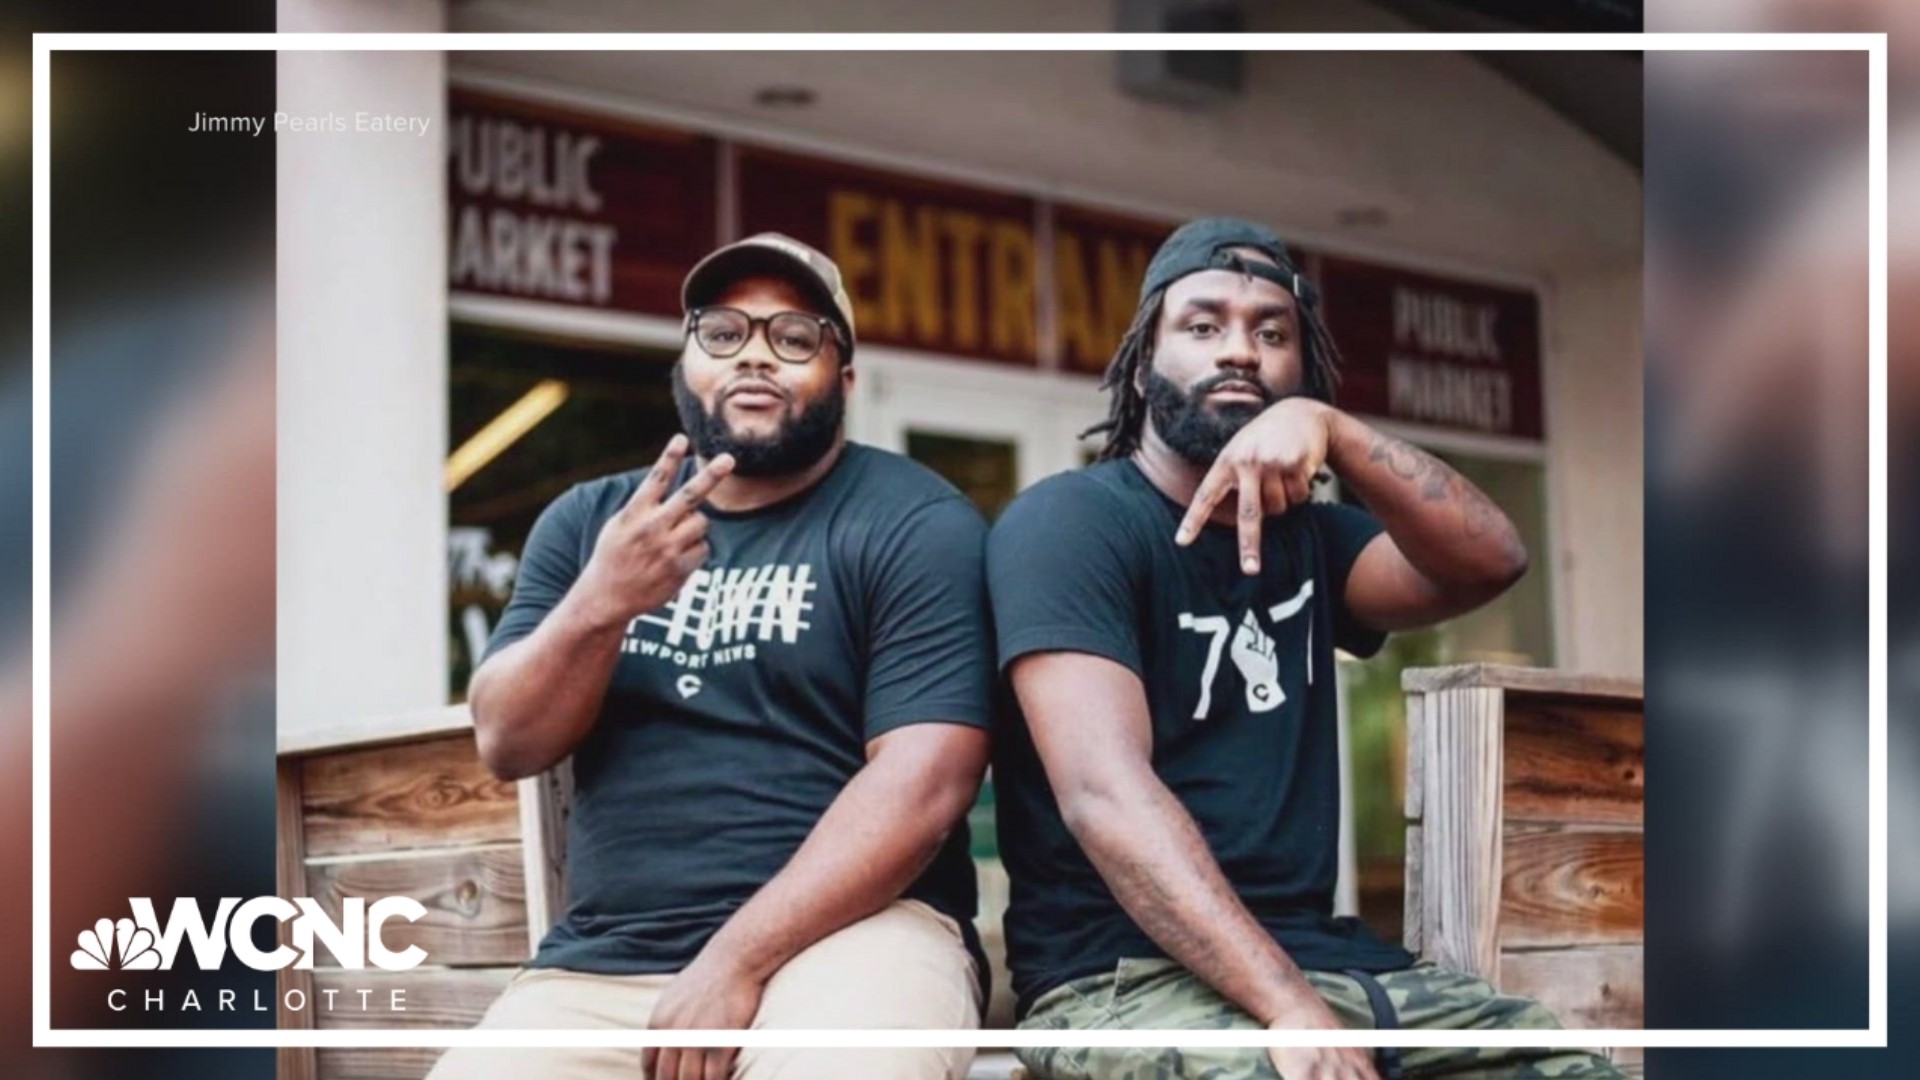 Daryl Cooper and Oscar Johnson of Jimmy Pearls in Uptown are being nominated for a James Beard award for best chef in the southeast.